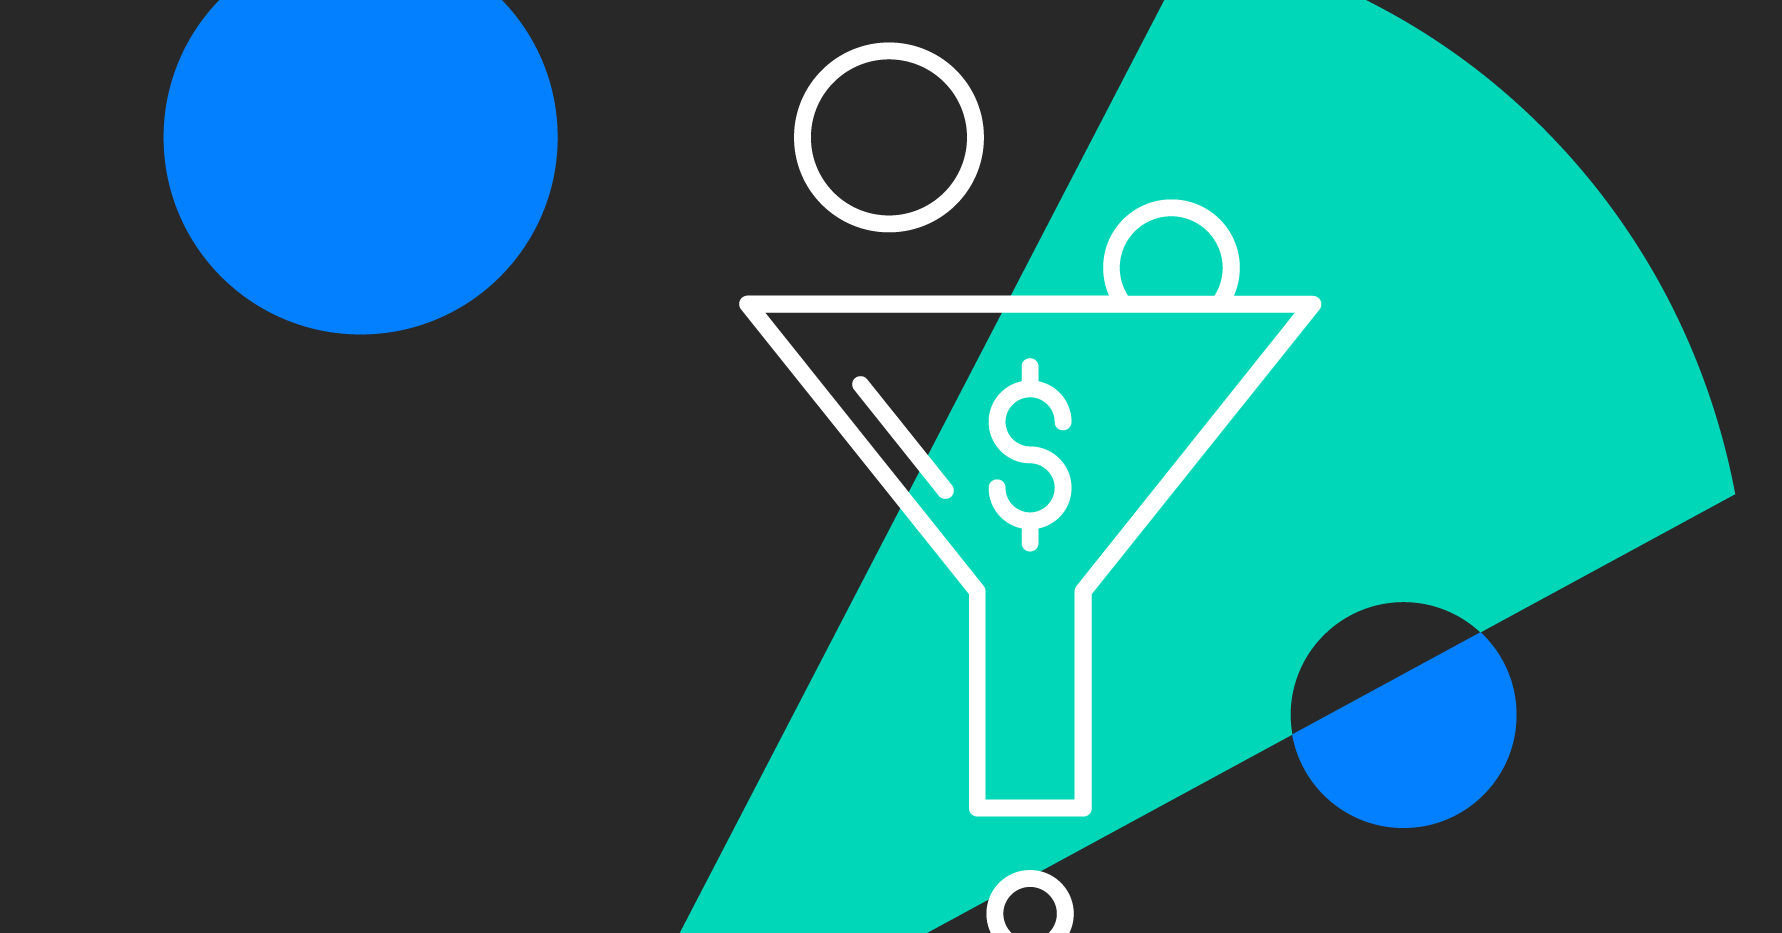 Stylistic illustration of a sales funnel labeled with a dollar sign